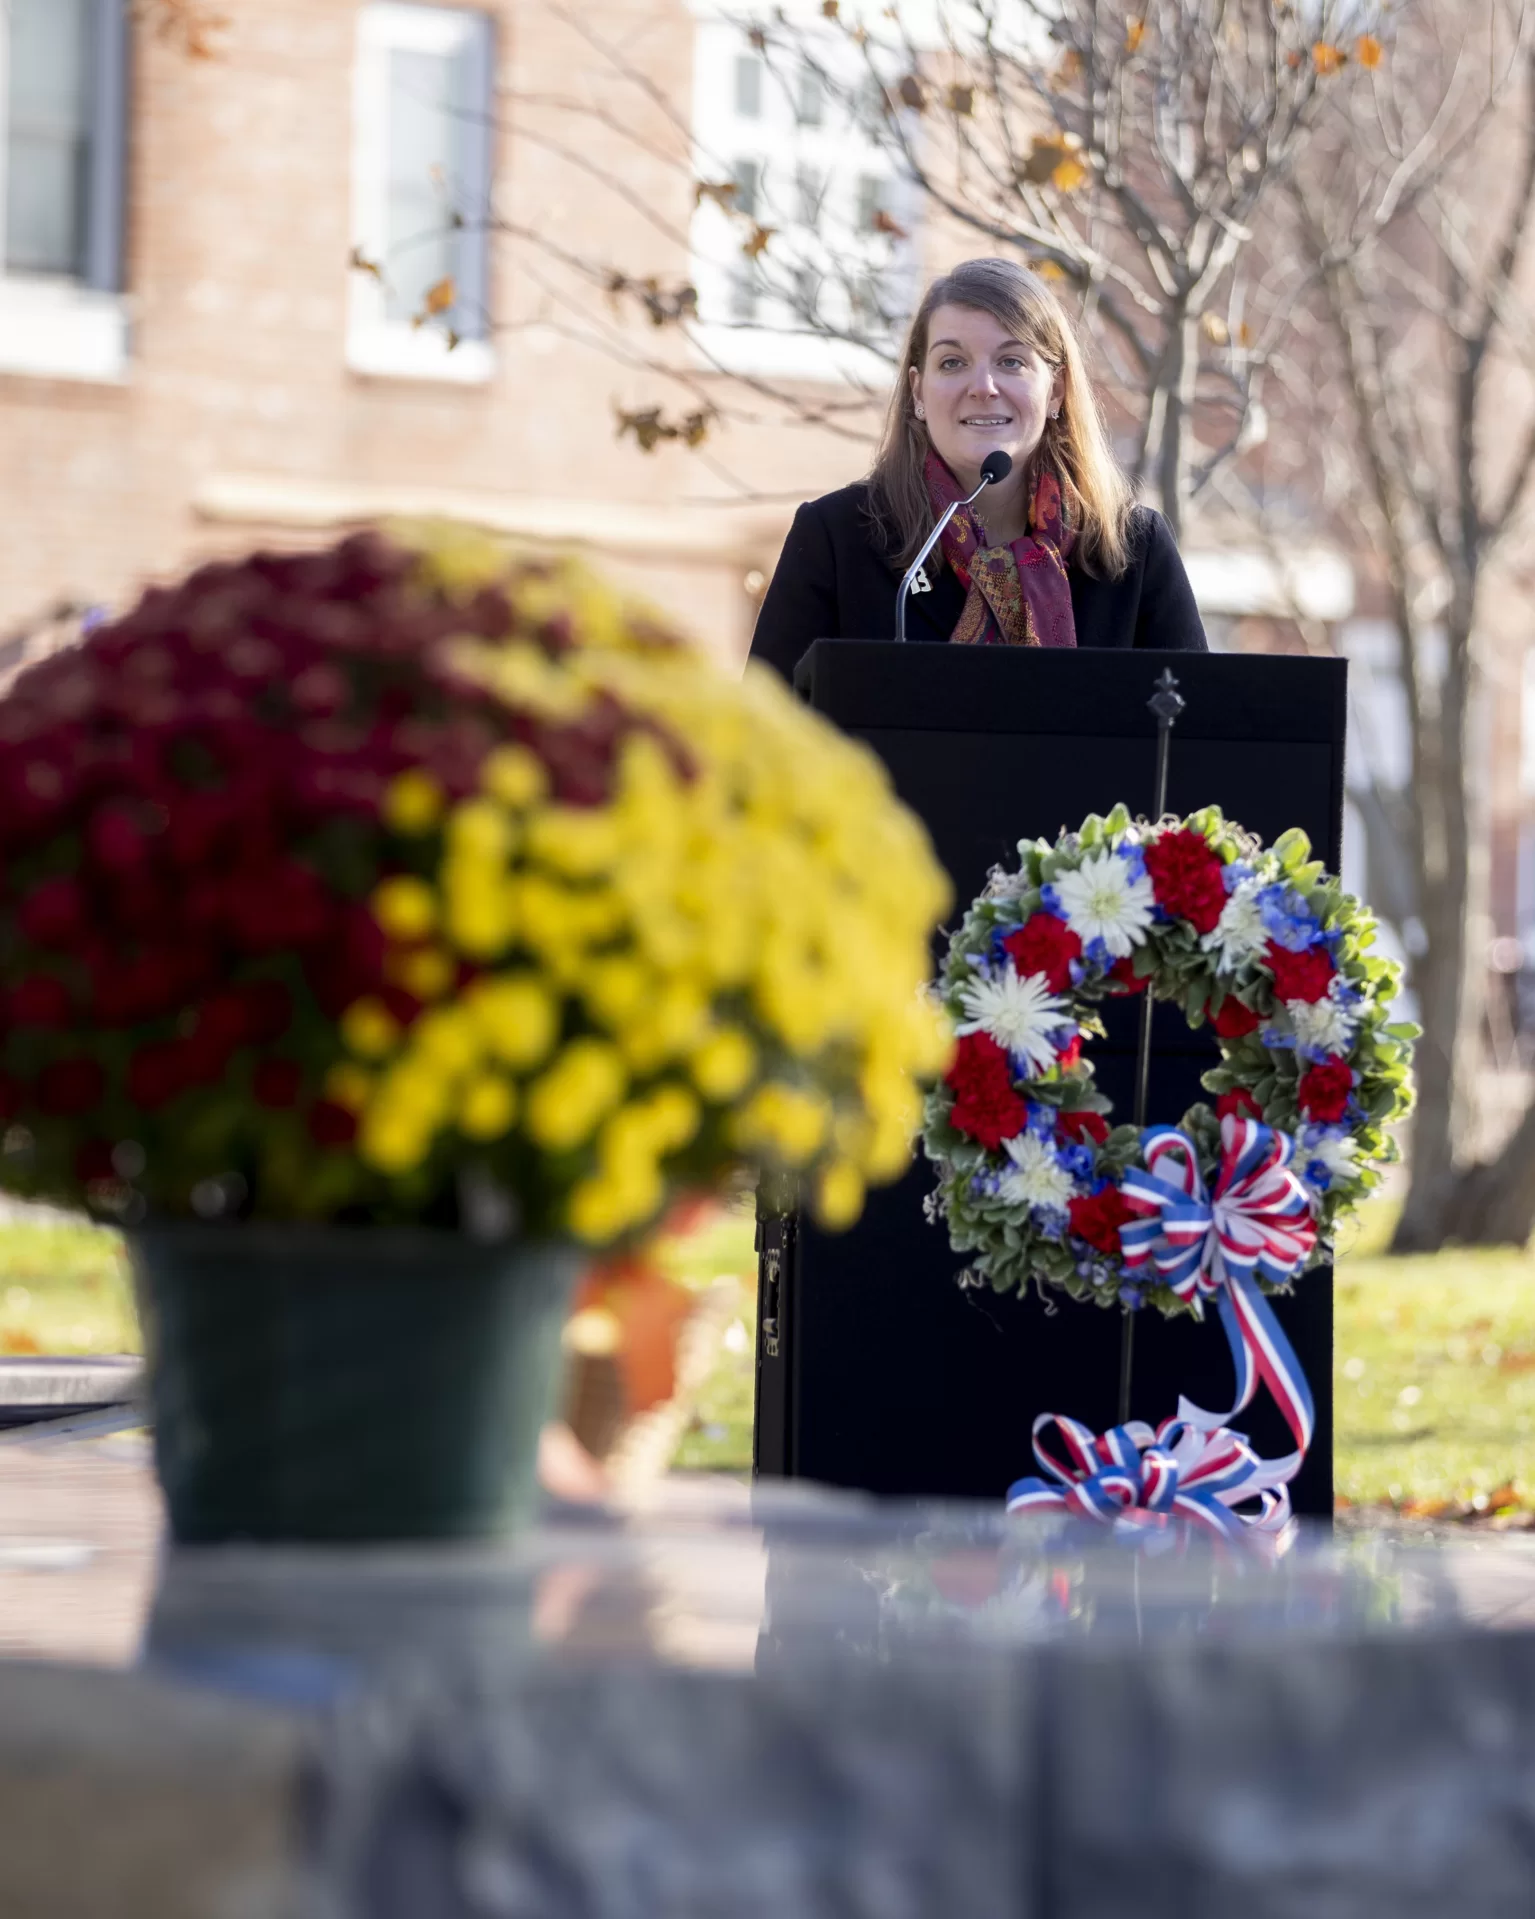 Veterans Day Ceremony at the Veterans Plaza
Brittany provided the following program outline:
Welcoming Remarks: Brittany
Opening Prayer: Brittany
Taps: Julie Jesurum ’22, a biochemistry major from Weston, Mass., plays on trumpet
Poem for Safety- Tyler Shambaugh '22
Invitation to lay a stone
Begin ritual by laying a stone for each branch in the armed forces
*Moment of Silence*
Poem for Peace- Frances White '22
Benediction-Raymond